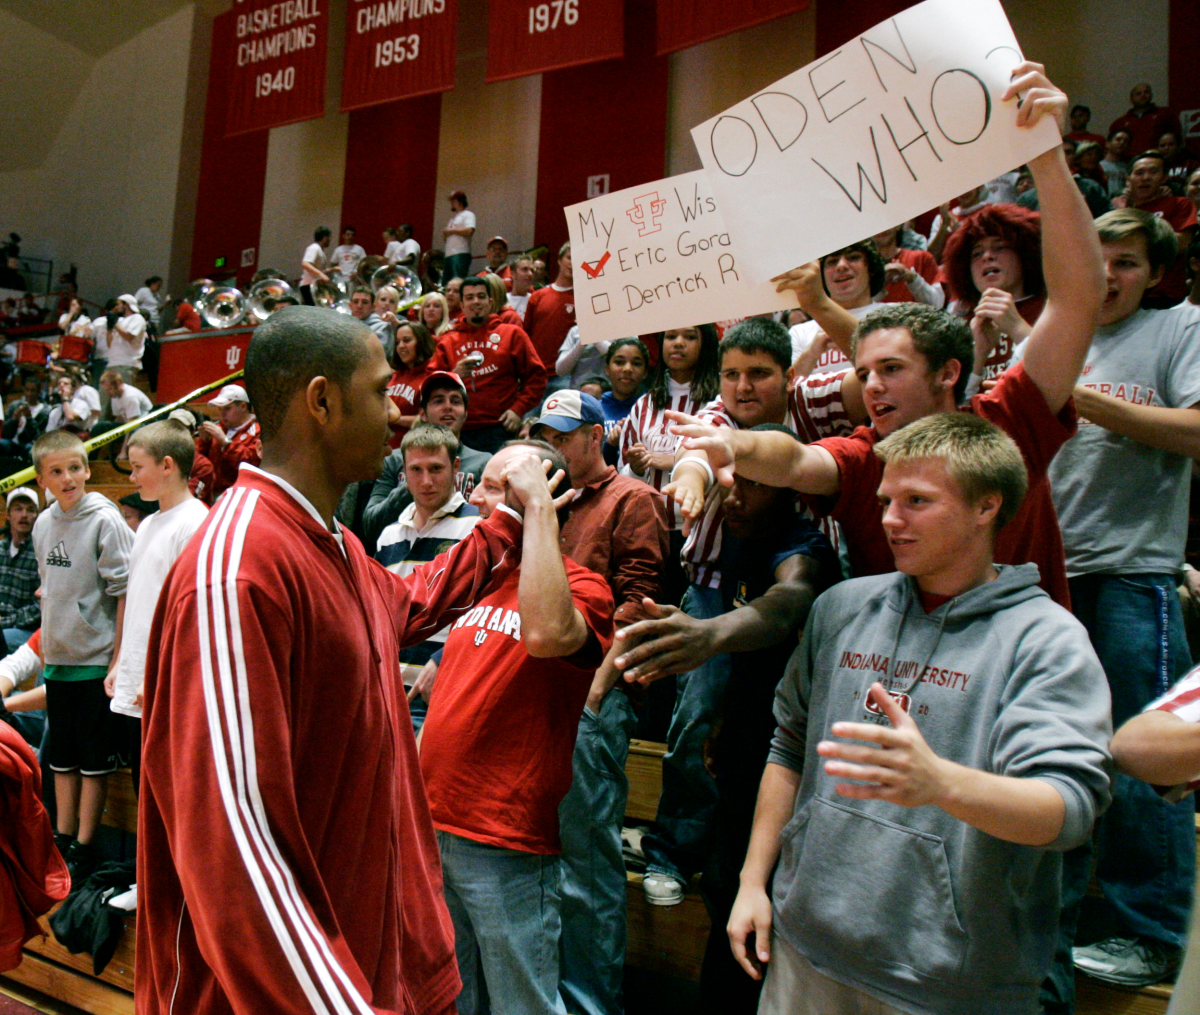 North Central High School basketball star Eric Gordon is greeted by fans.